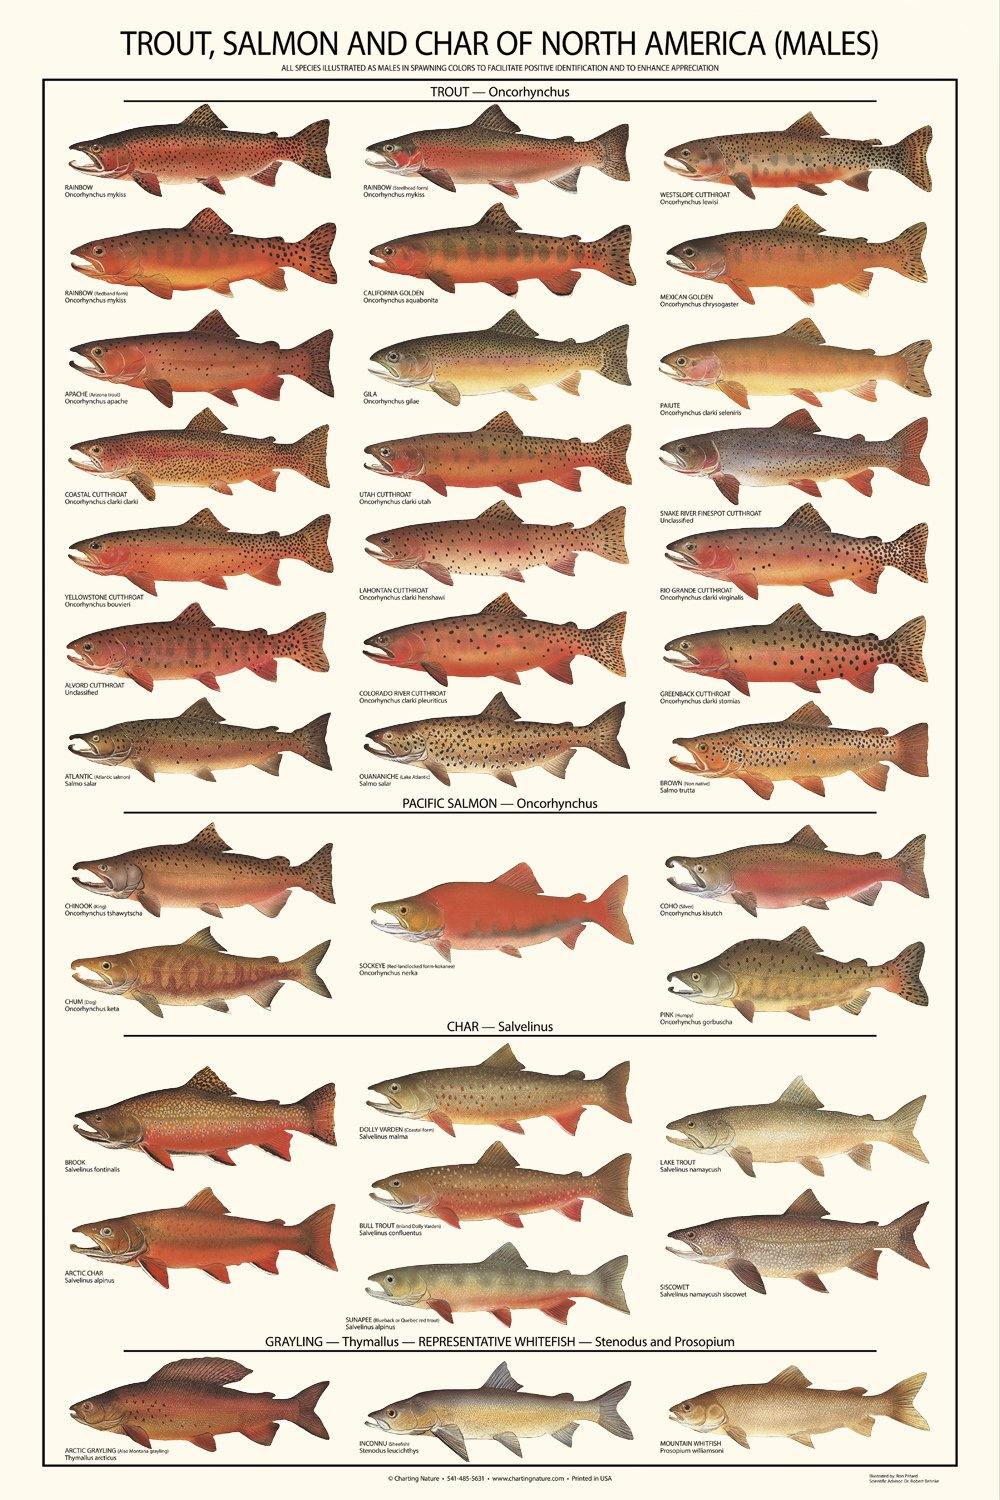 Trout, Salmon and Char ID Art Poster - Males